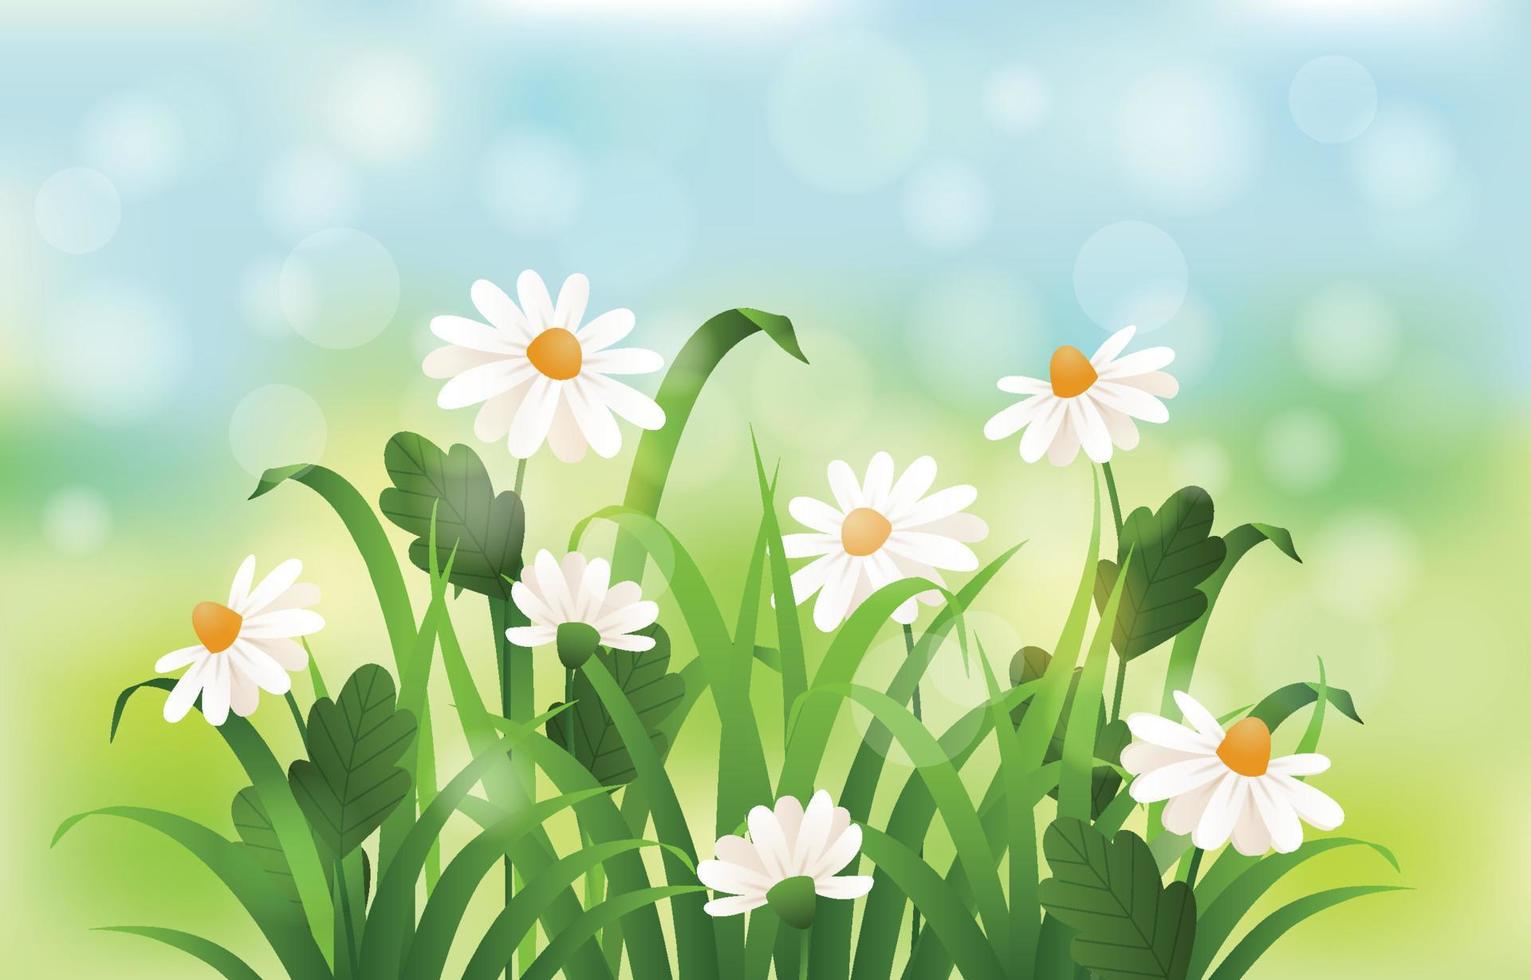 Daisies in Spring Floral Background vector